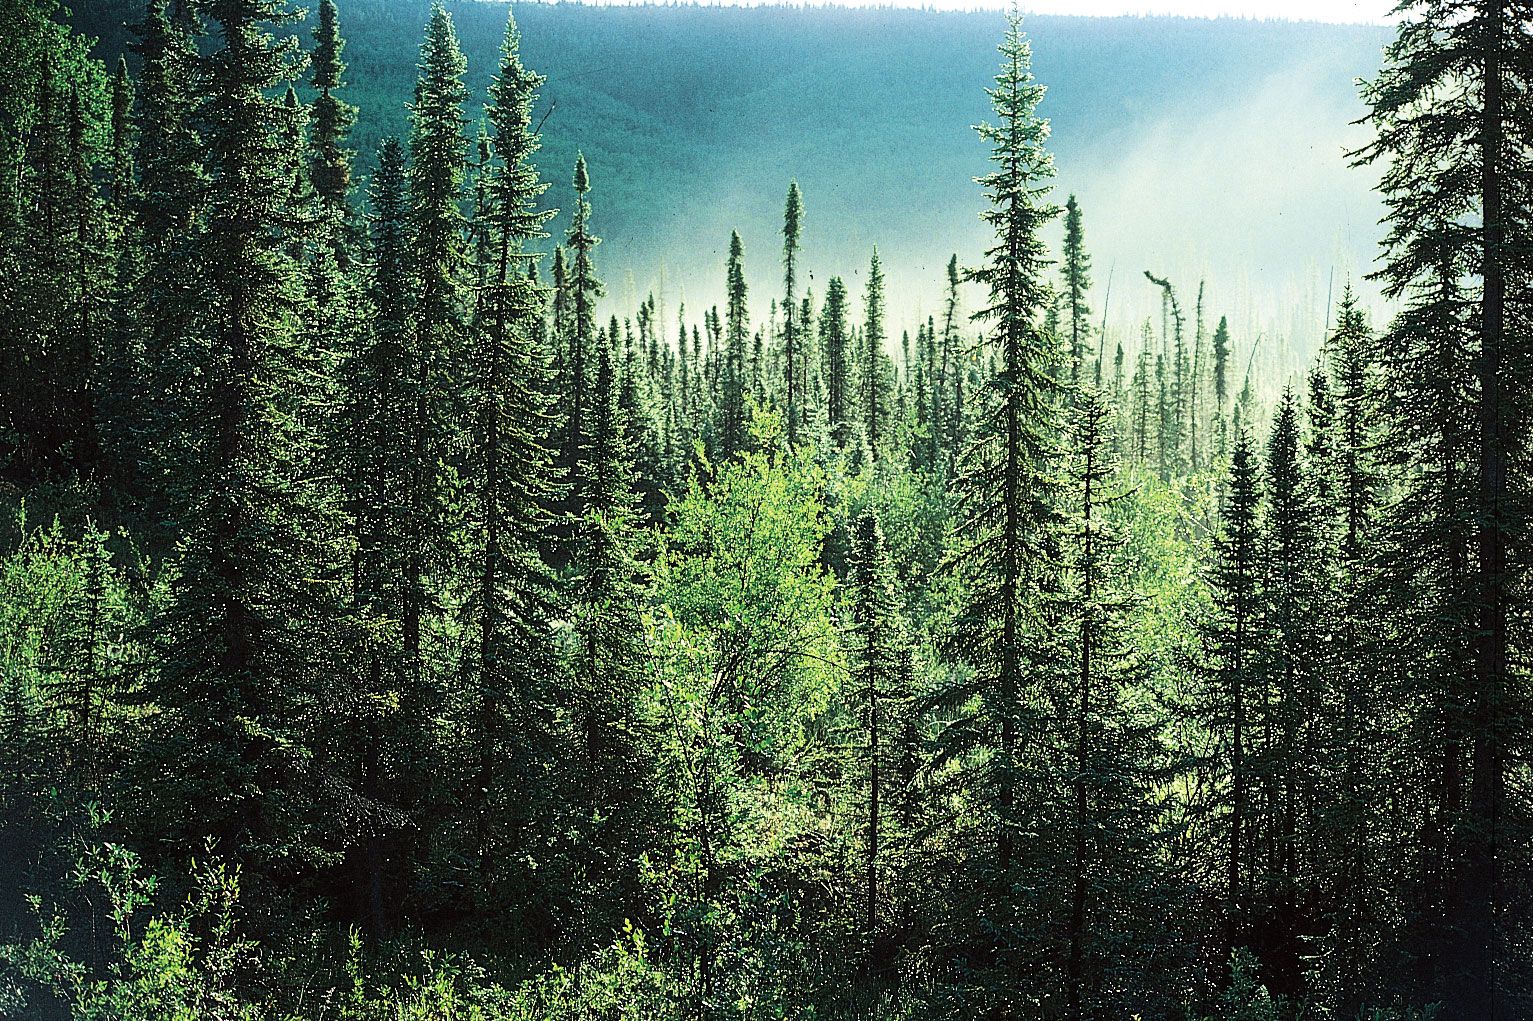 taiga. Definition, Climate, Map, & Facts